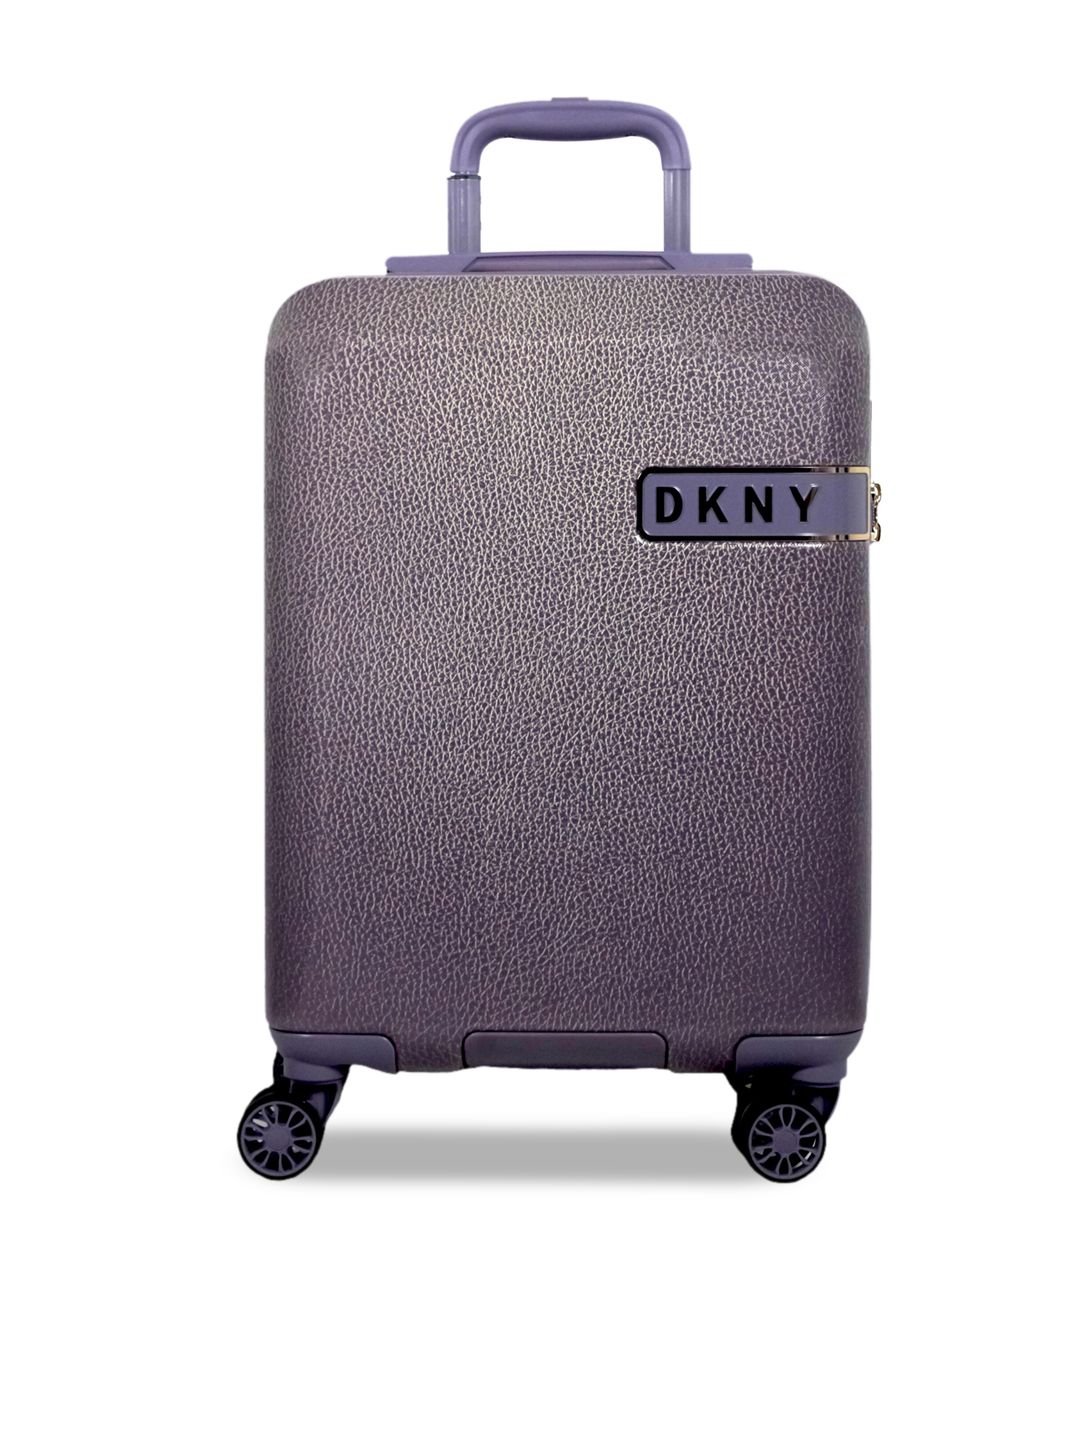 Dkny Violet Luggage Rapture Hard Trolley With Flush Mount TSA Lock Price in India